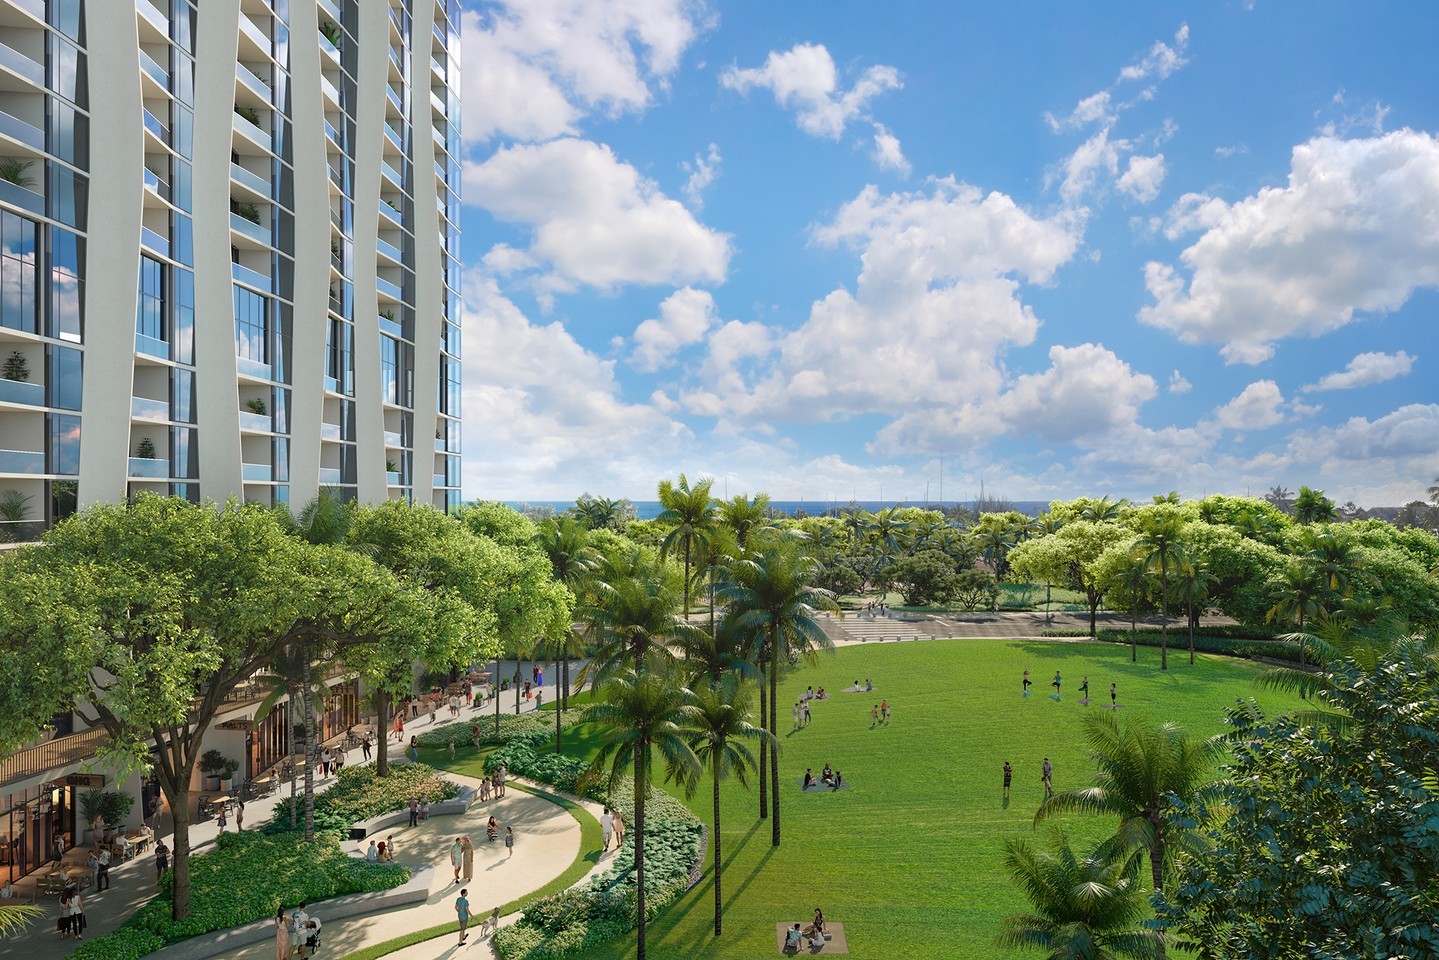 Come this fall, Kō‘ula residents will enjoy resort-style amenity spaces as well as the lush green space of Victoria Ward Park as their backyard, the perfect place for picnics and play time. Click the link in bio to learn more about the thoughtfully designed spaces and nature surrounding Kō‘ula.